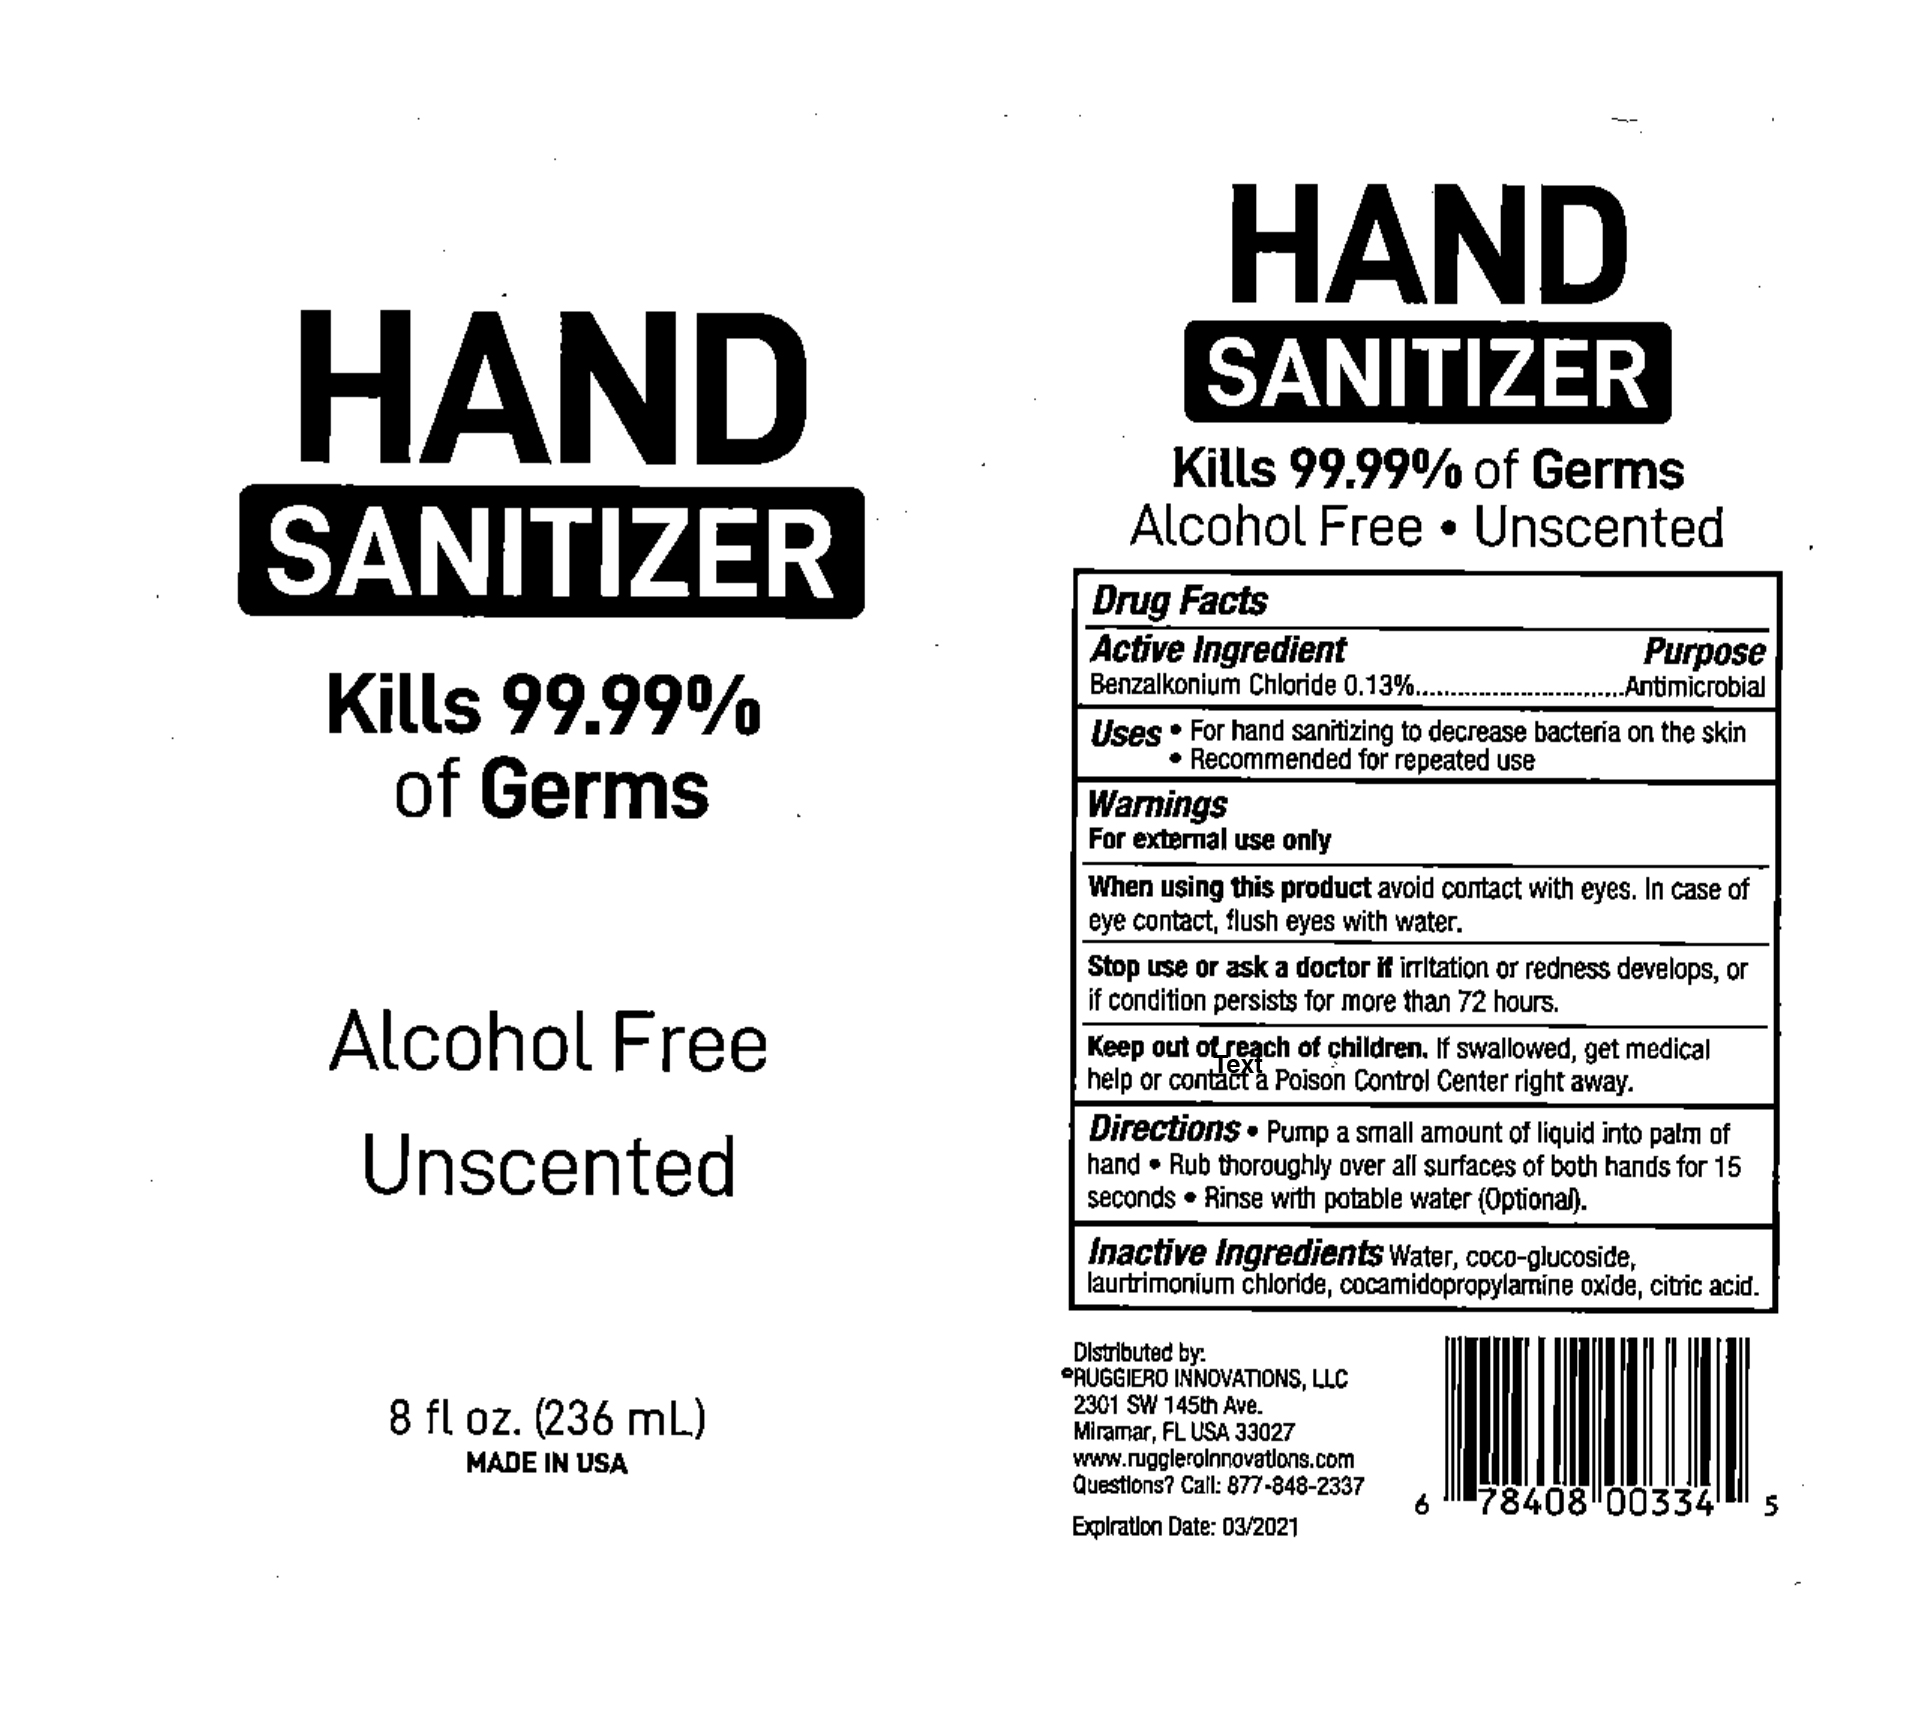 FDA Label for Hand Sanitizer Indications, Usage & Precautions